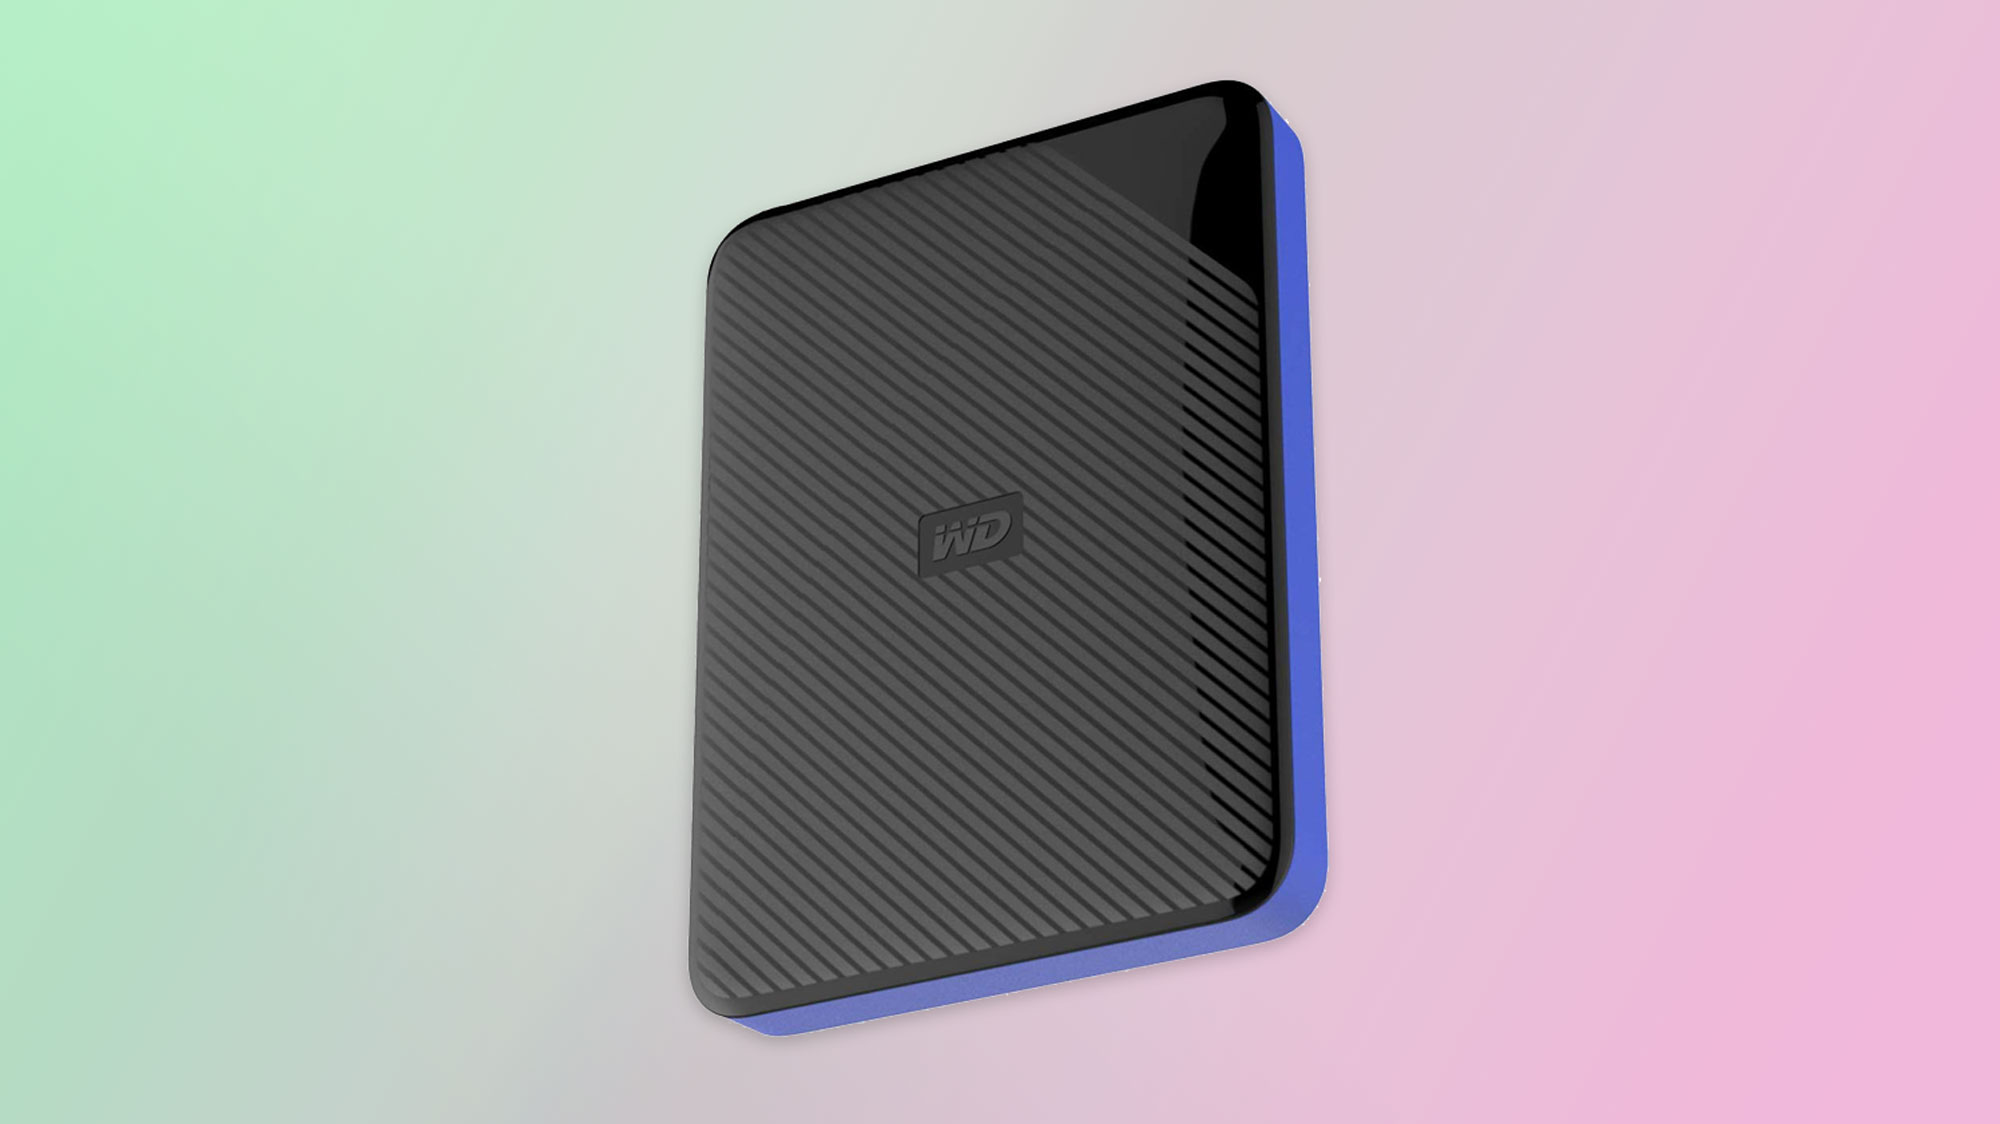 Best external hard drives: WD Gaming Works with PlayStation